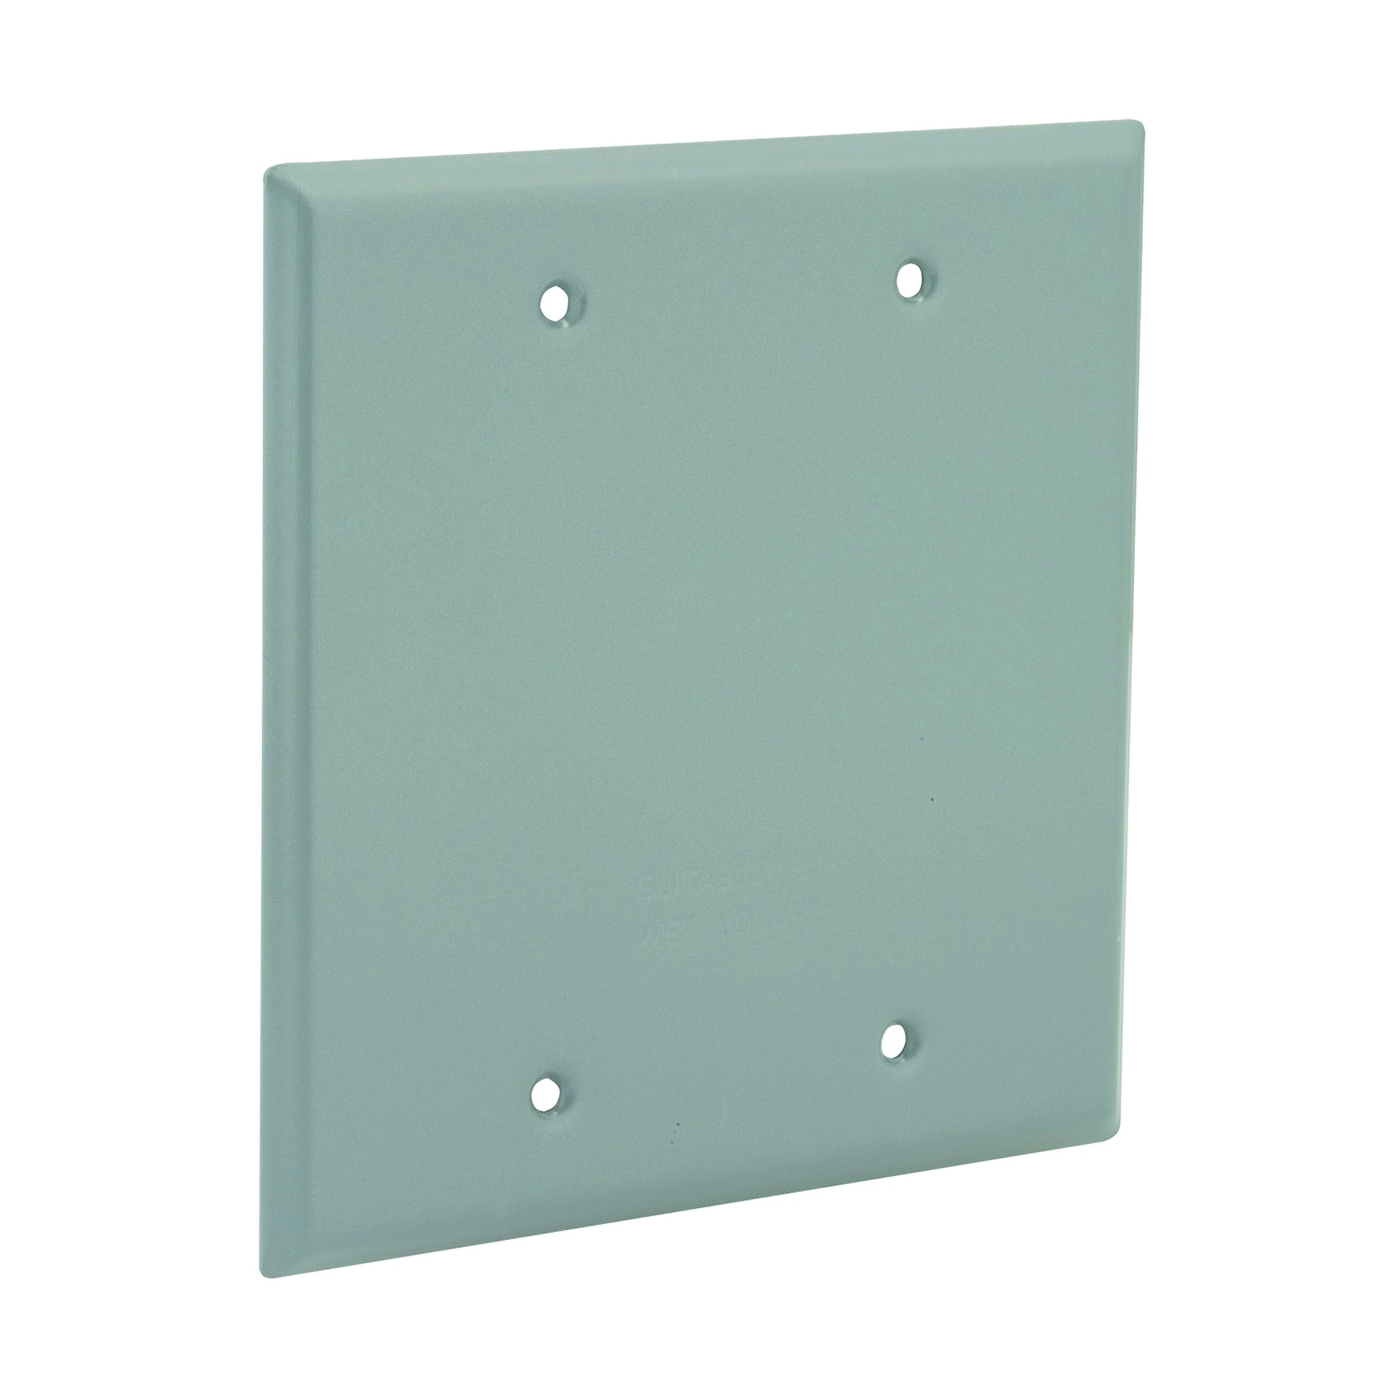 5175-0 Cover, 4-1/2 in L, 4-1/2 in W, Aluminum, Gray, Powder-Coated